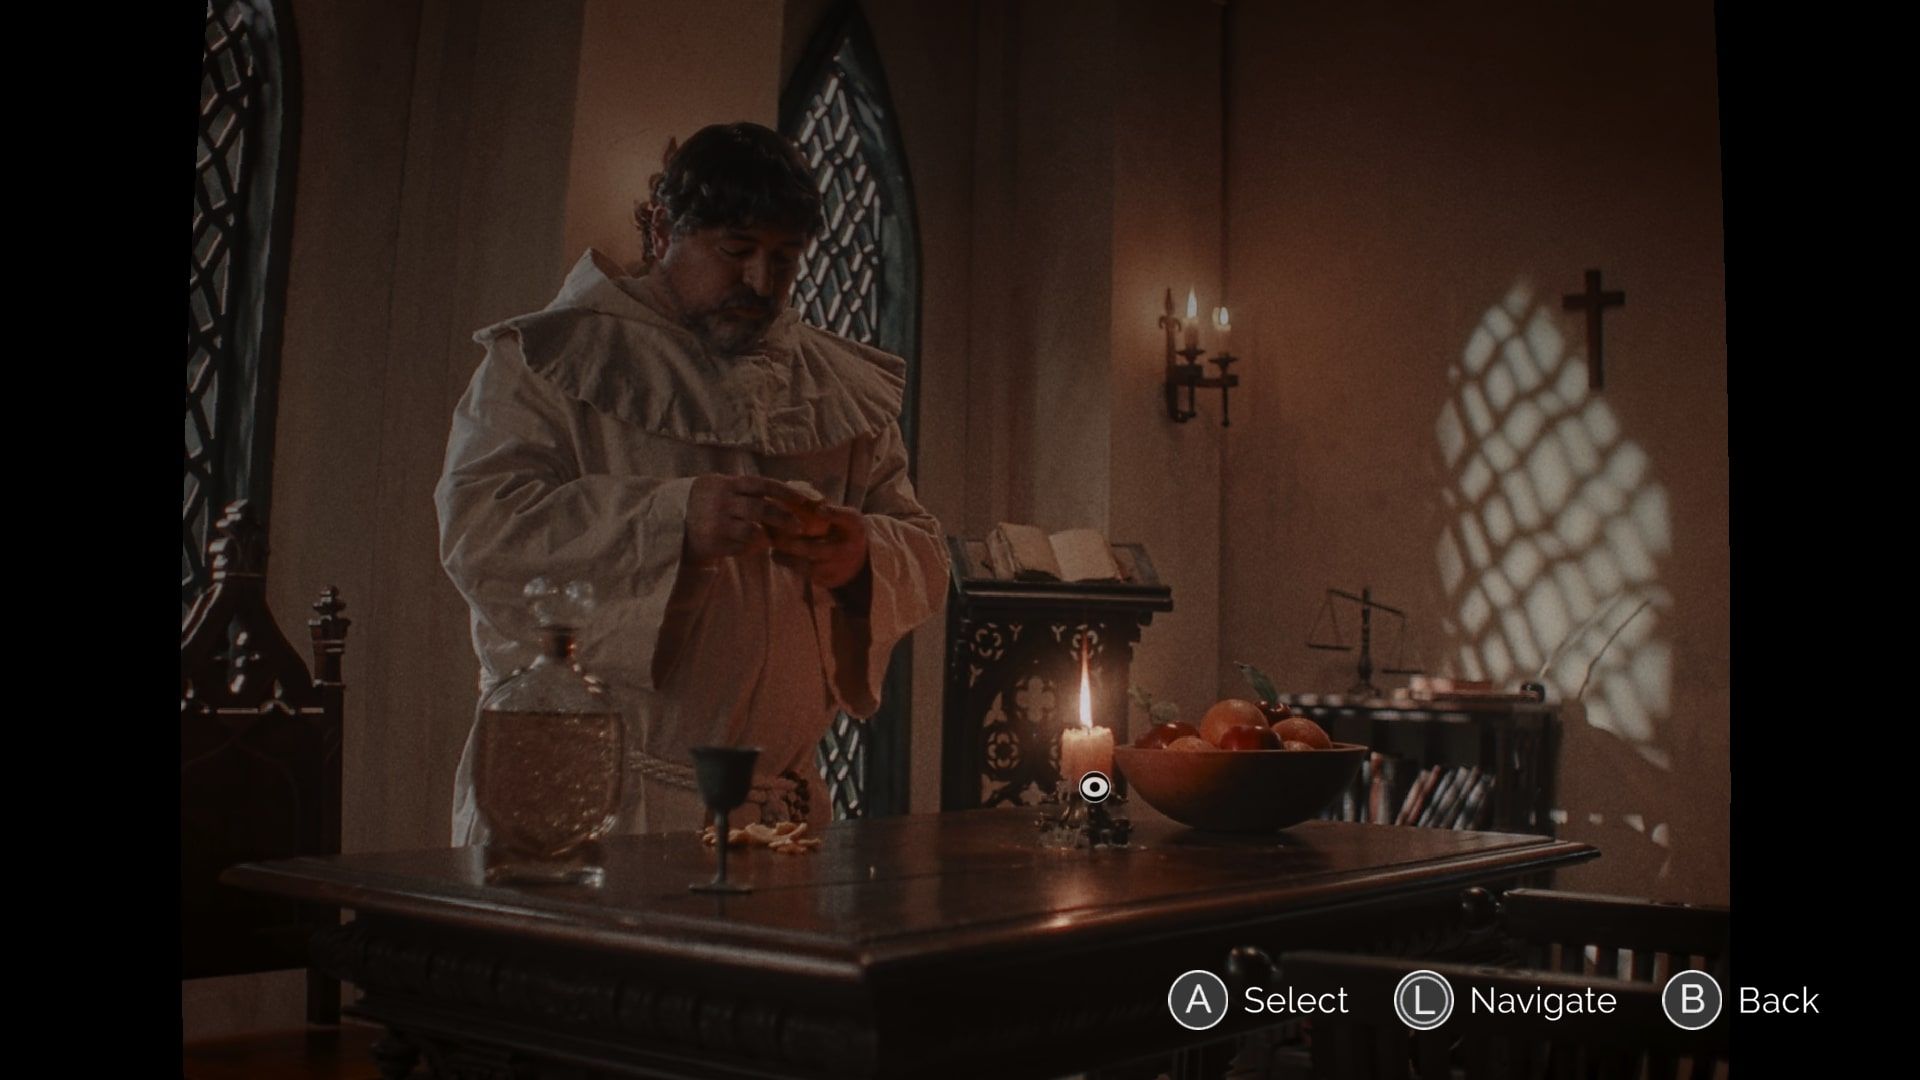 IMMORTALITY monk eating orange in film, cursor selecting candle in image mode